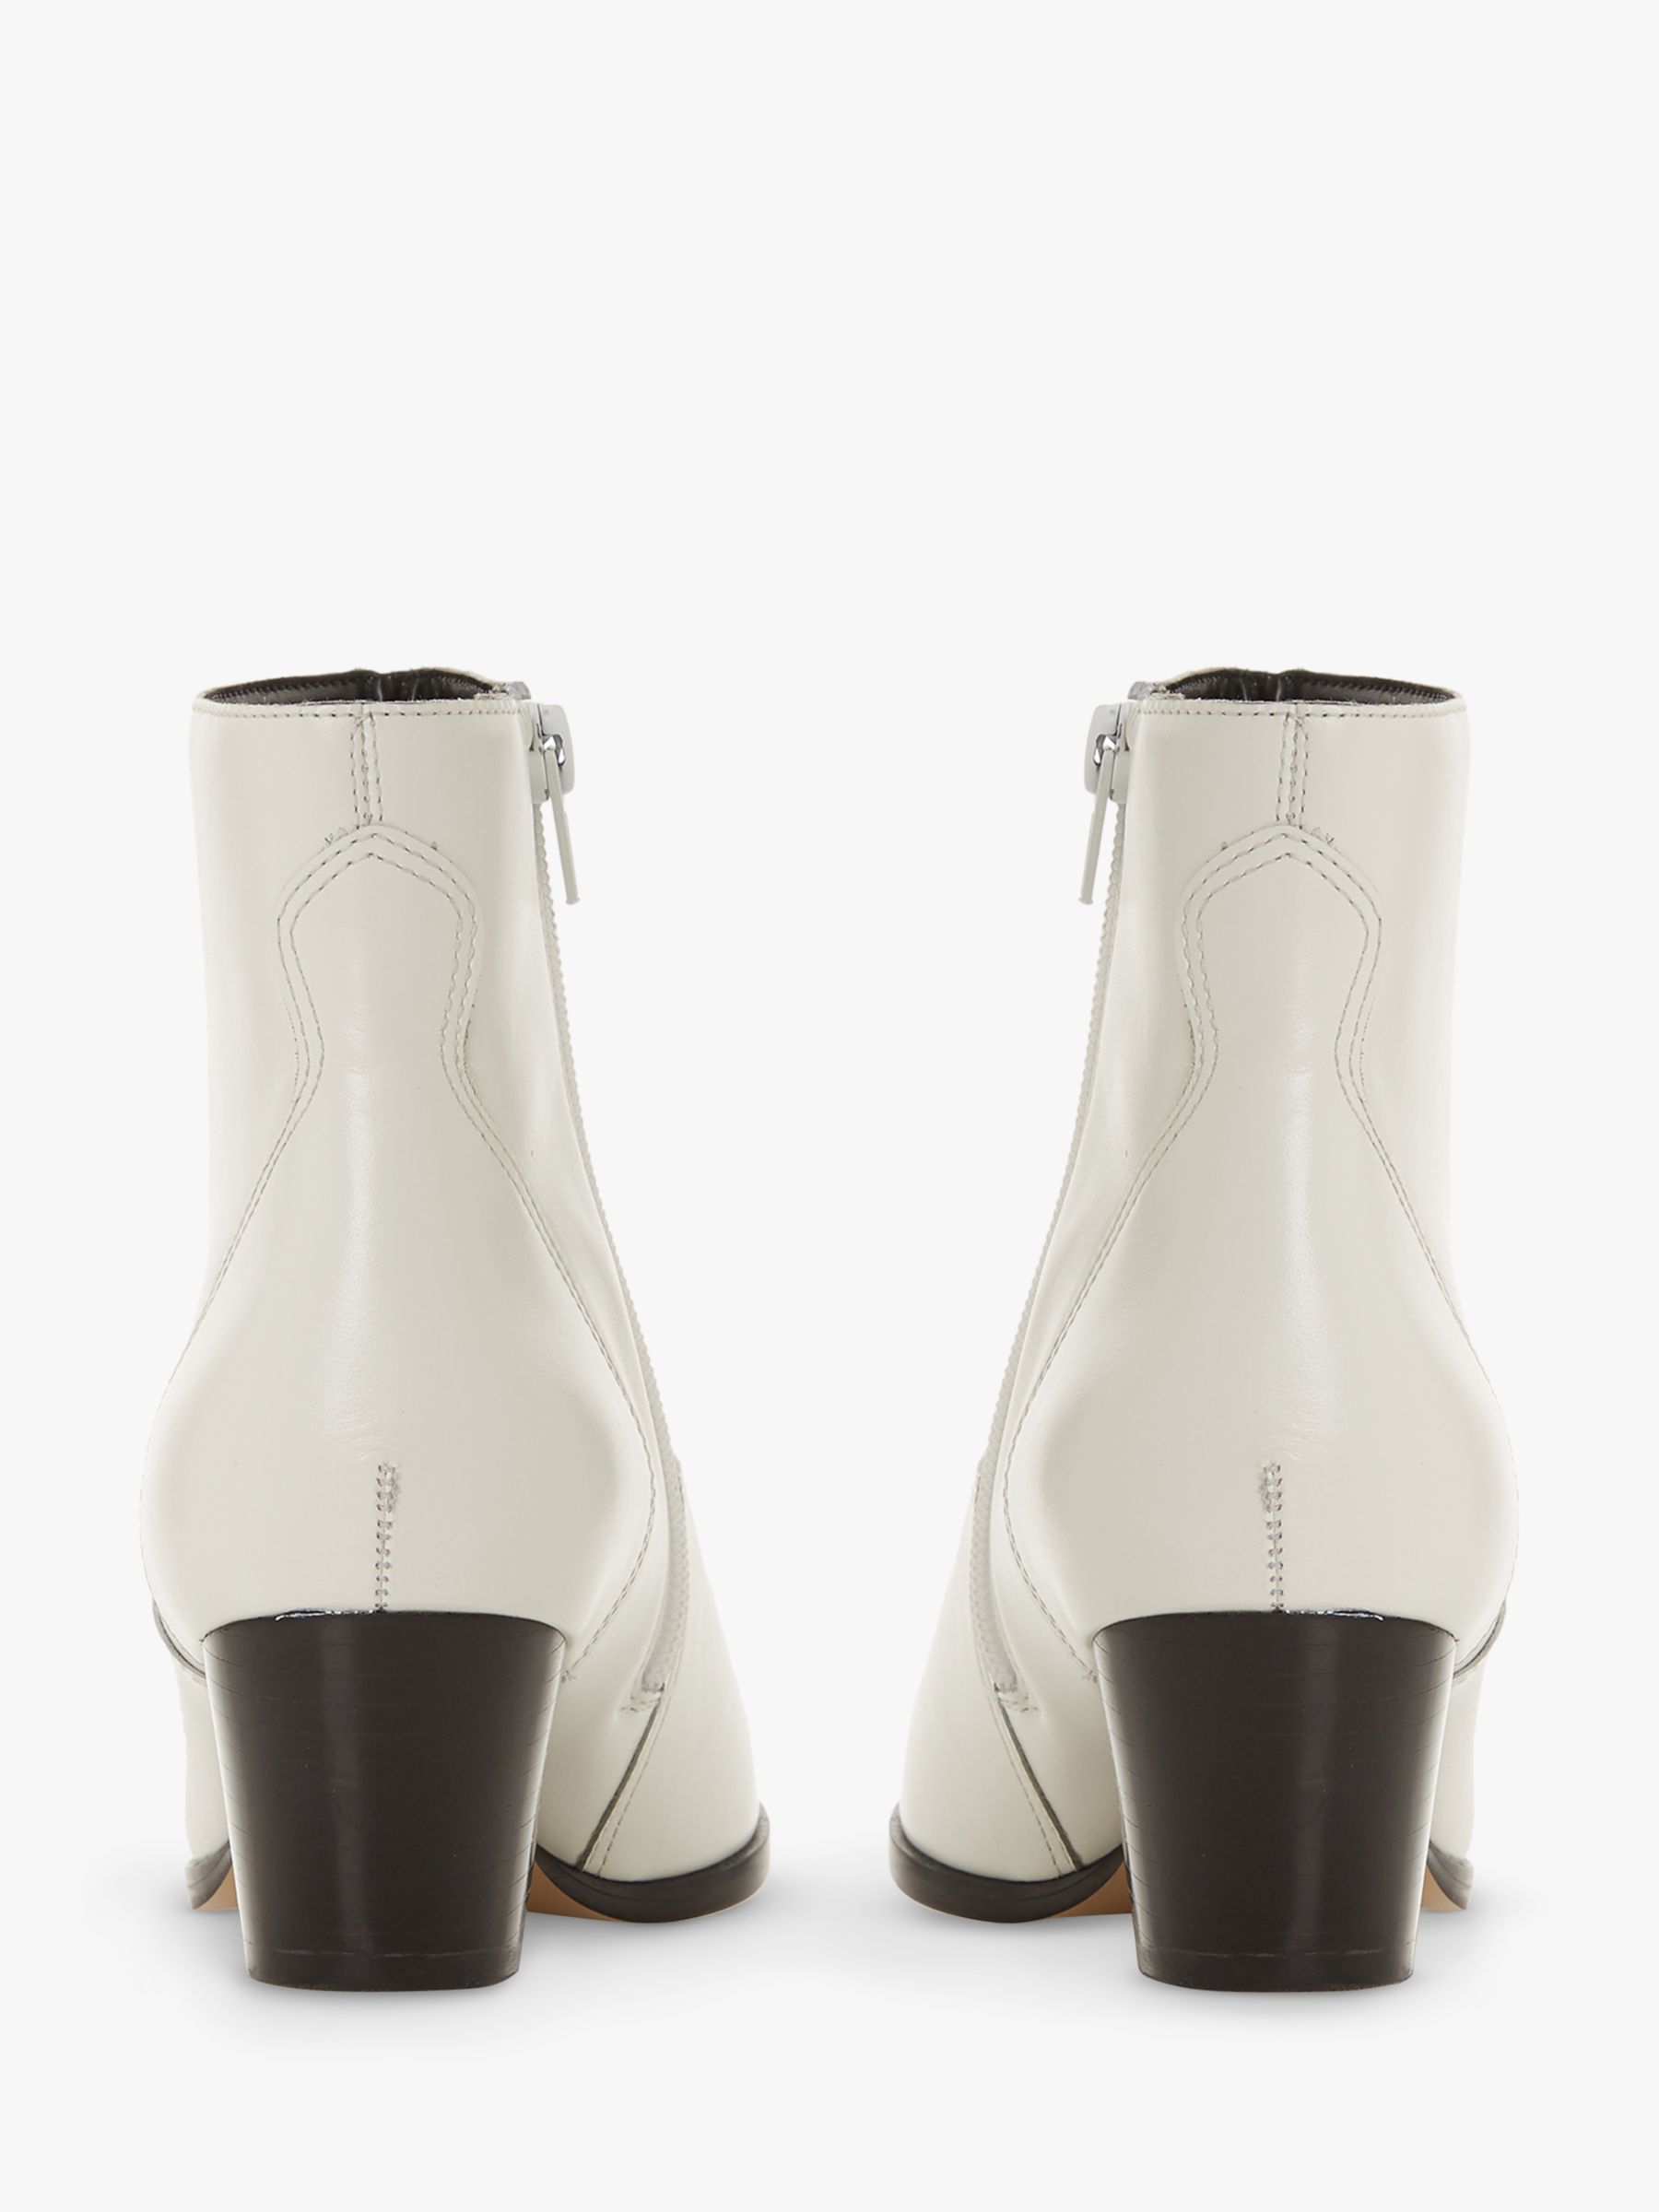 cuban heel ankle boots